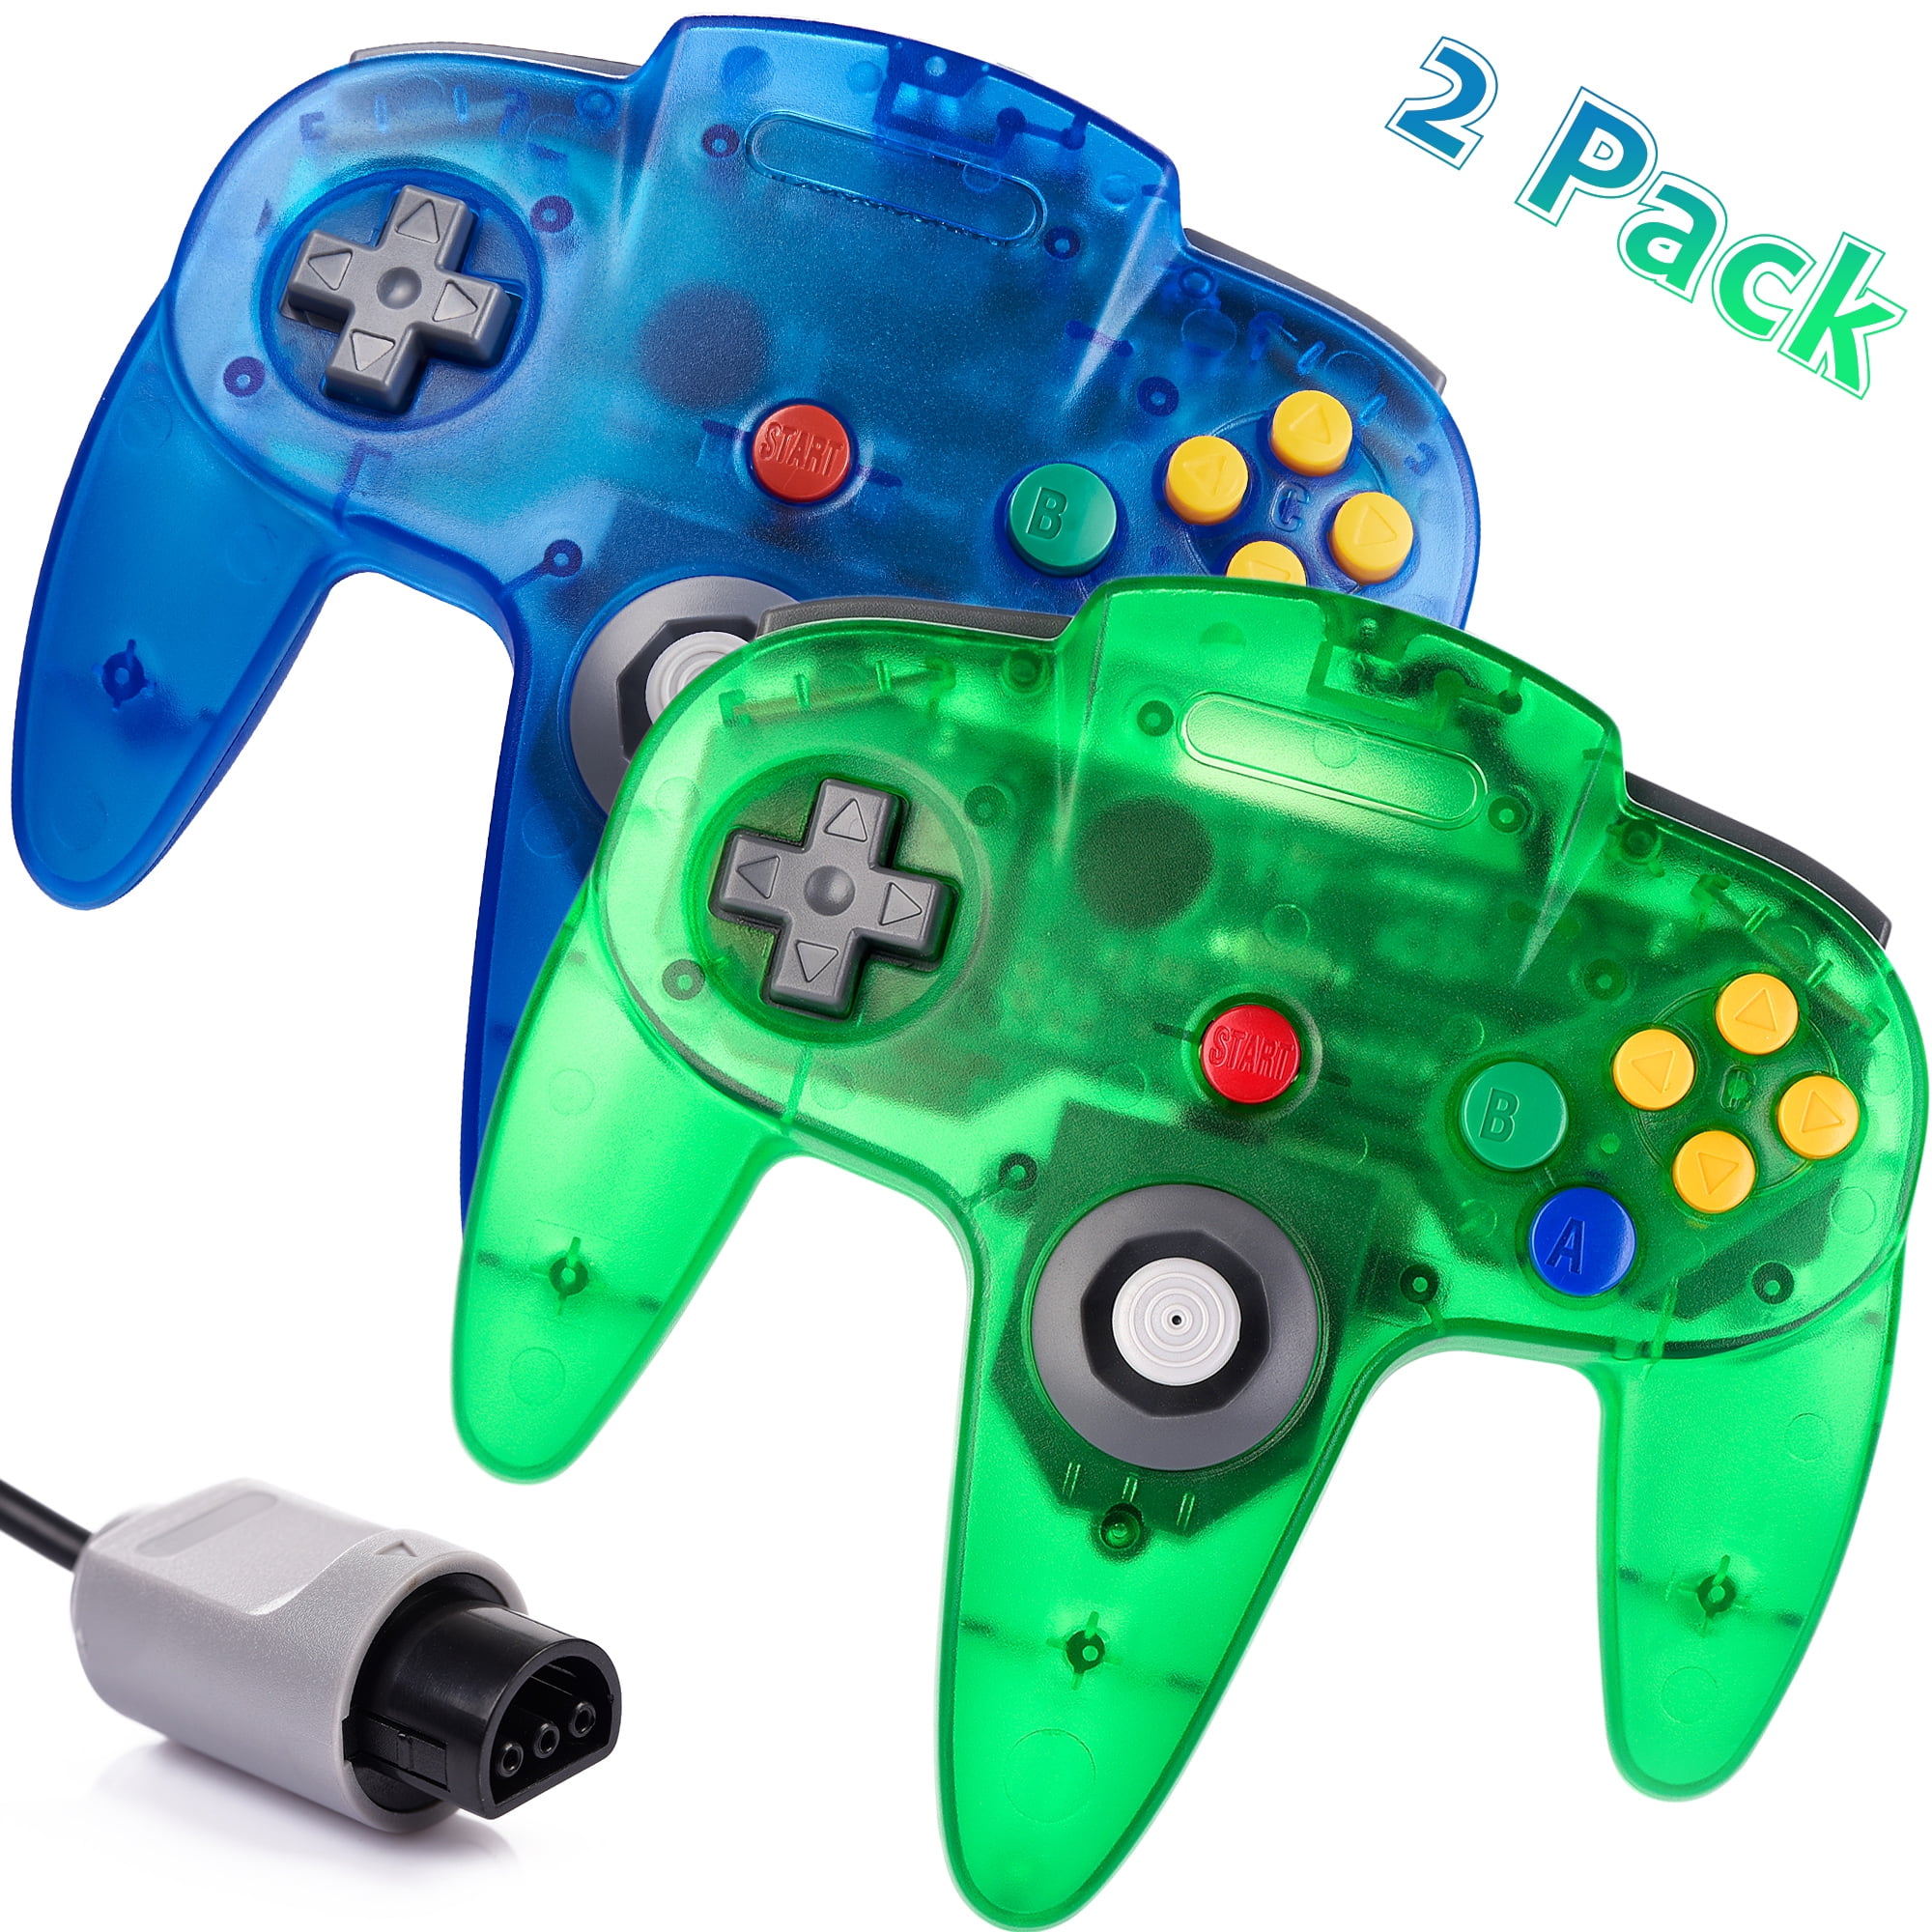 Miadore 2Pack Classic N64 Controller, Wired N64 Gamepad with